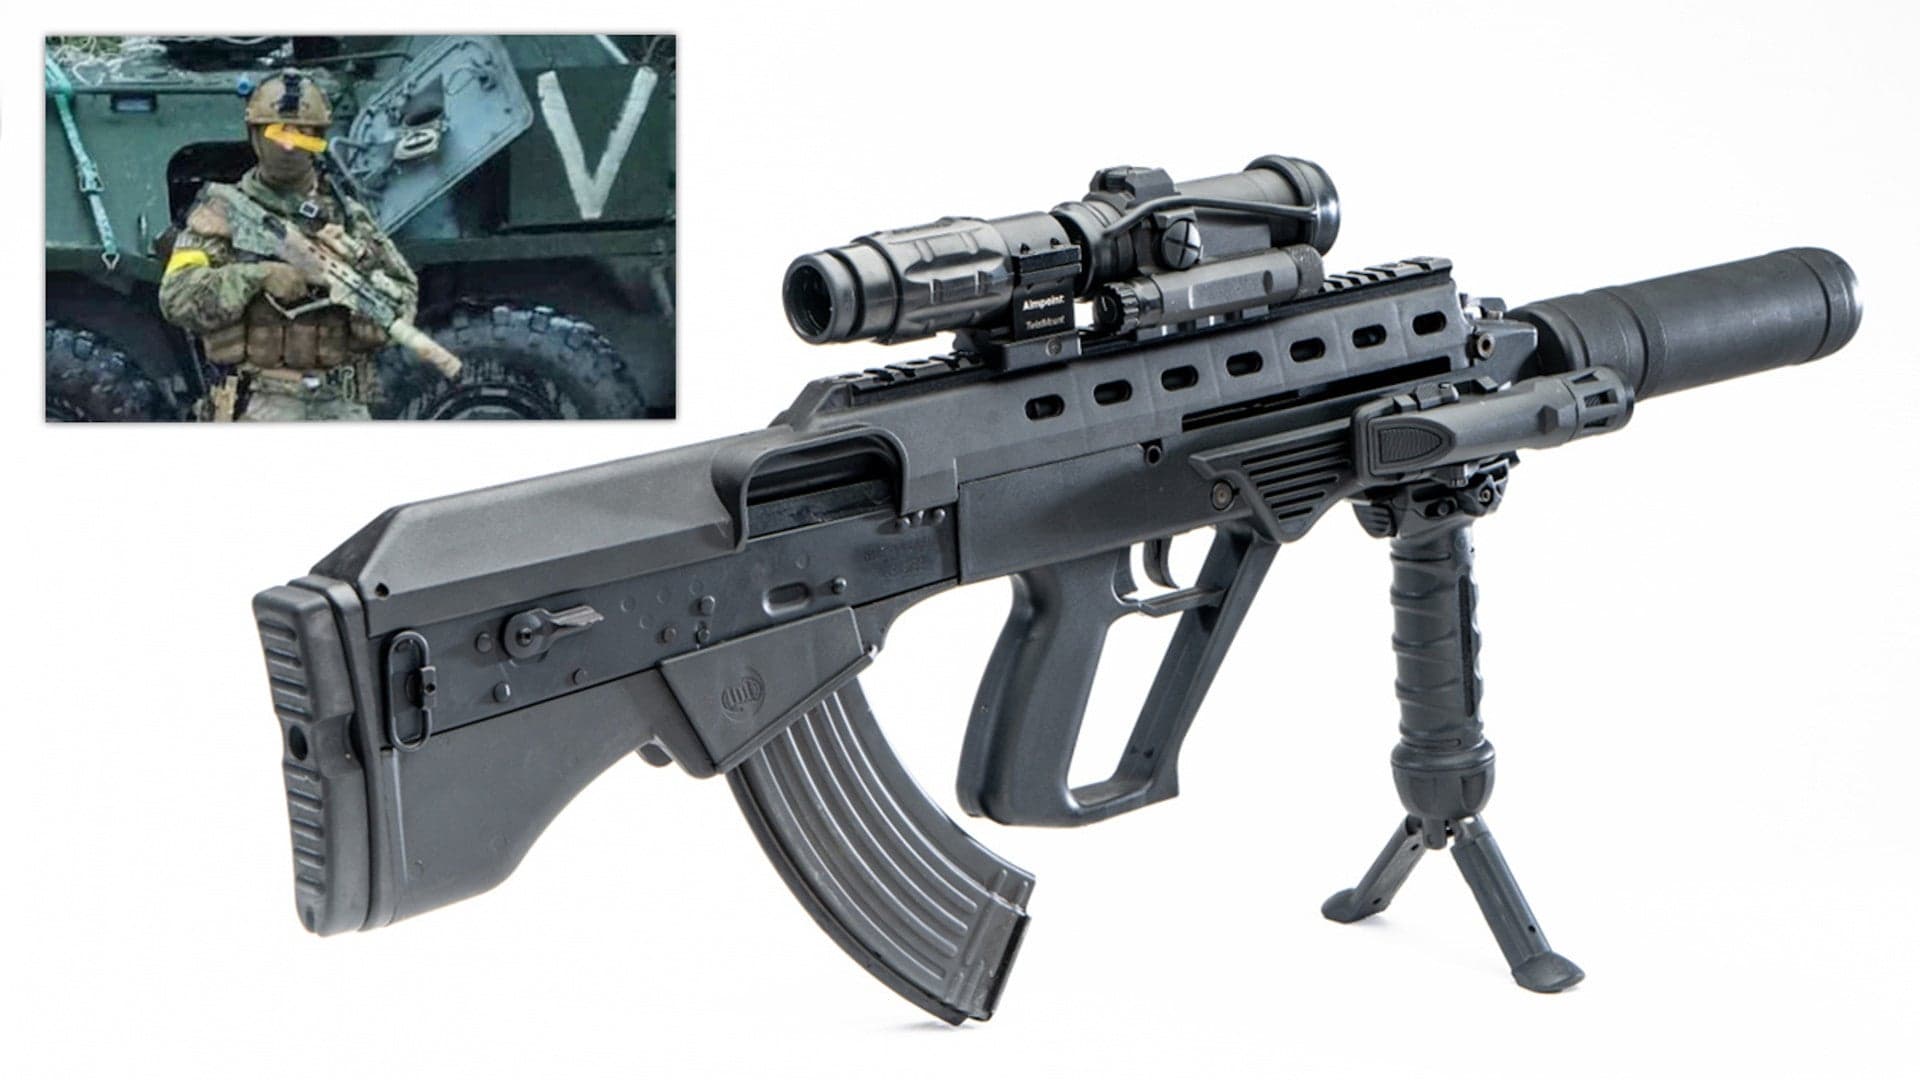 Ukraine’s Indigenous “Malyuk” Bullpup Rifle Is The Weapon Of Choice For Its Special Operators